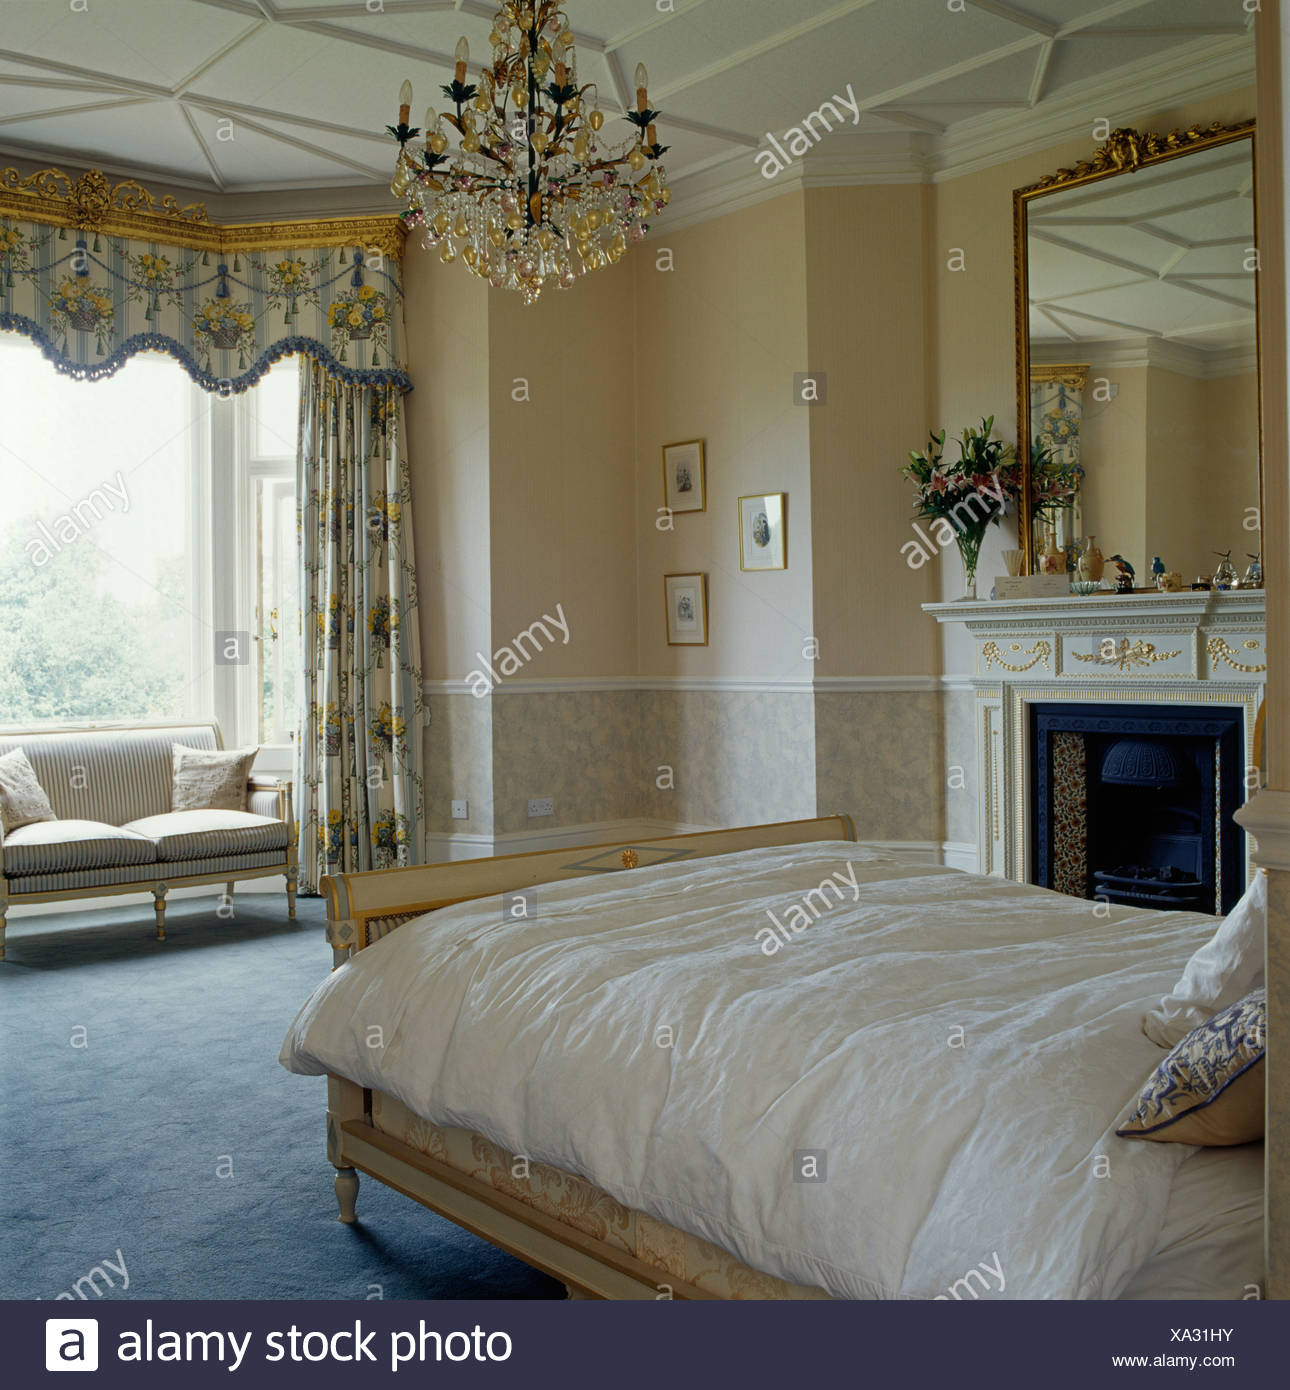 Interiors Traditional Bedrooms Chandeliers High Resolution Stock Photography And Images Alamy,Best Places To Travel In November And December